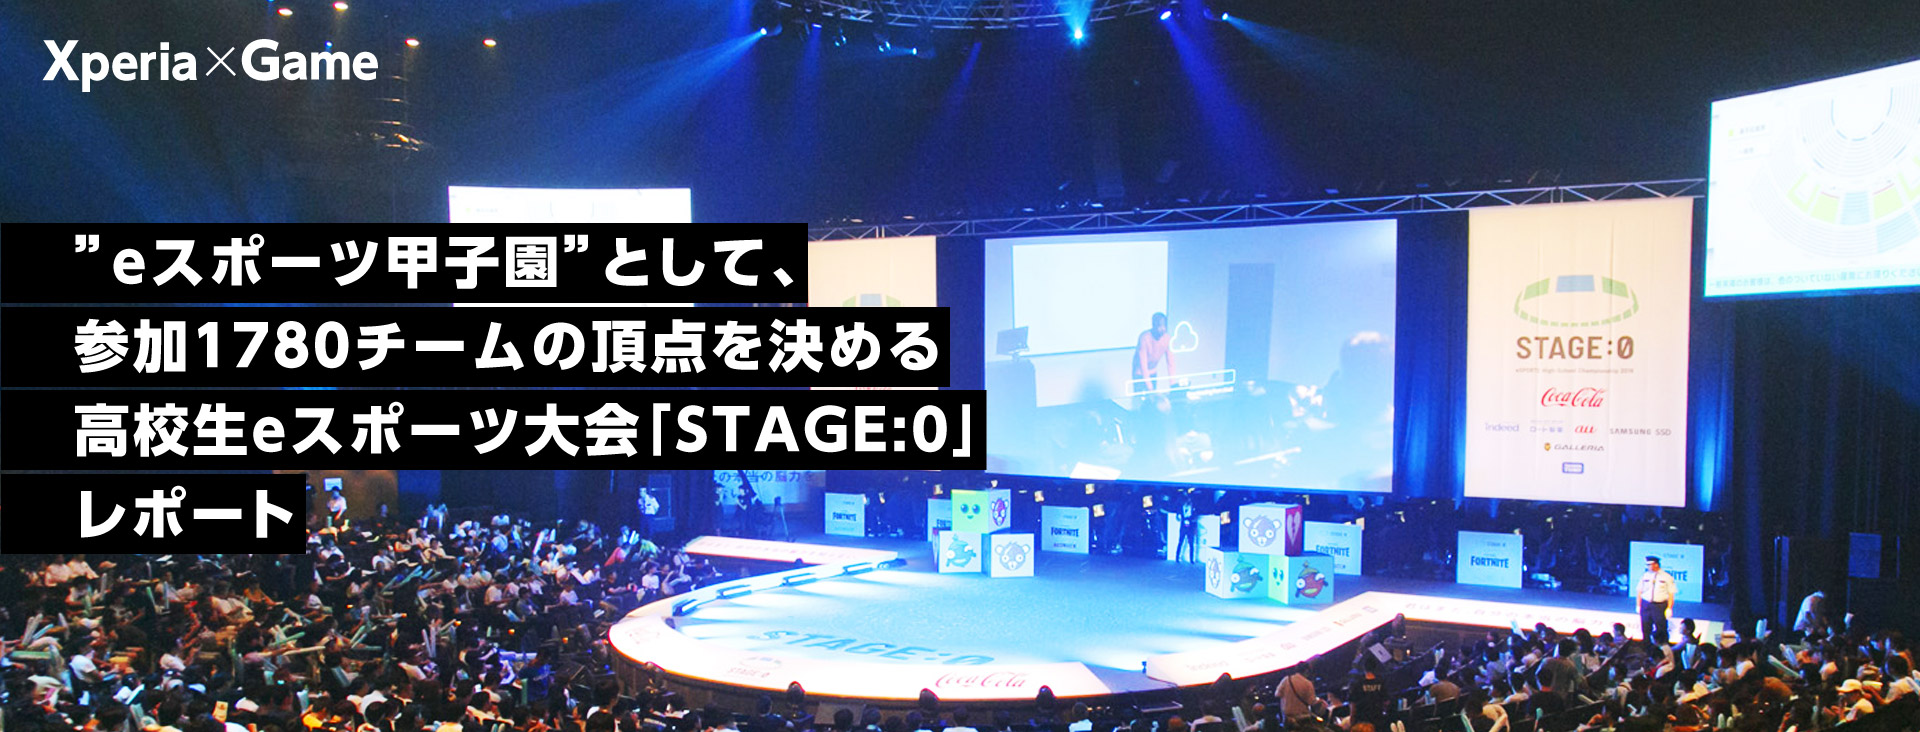 Xperia×Game ”eスポーツ甲子園”として、参加1780チームの頂点を決める高校生eスポーツ大会「STAGE:0」レポート